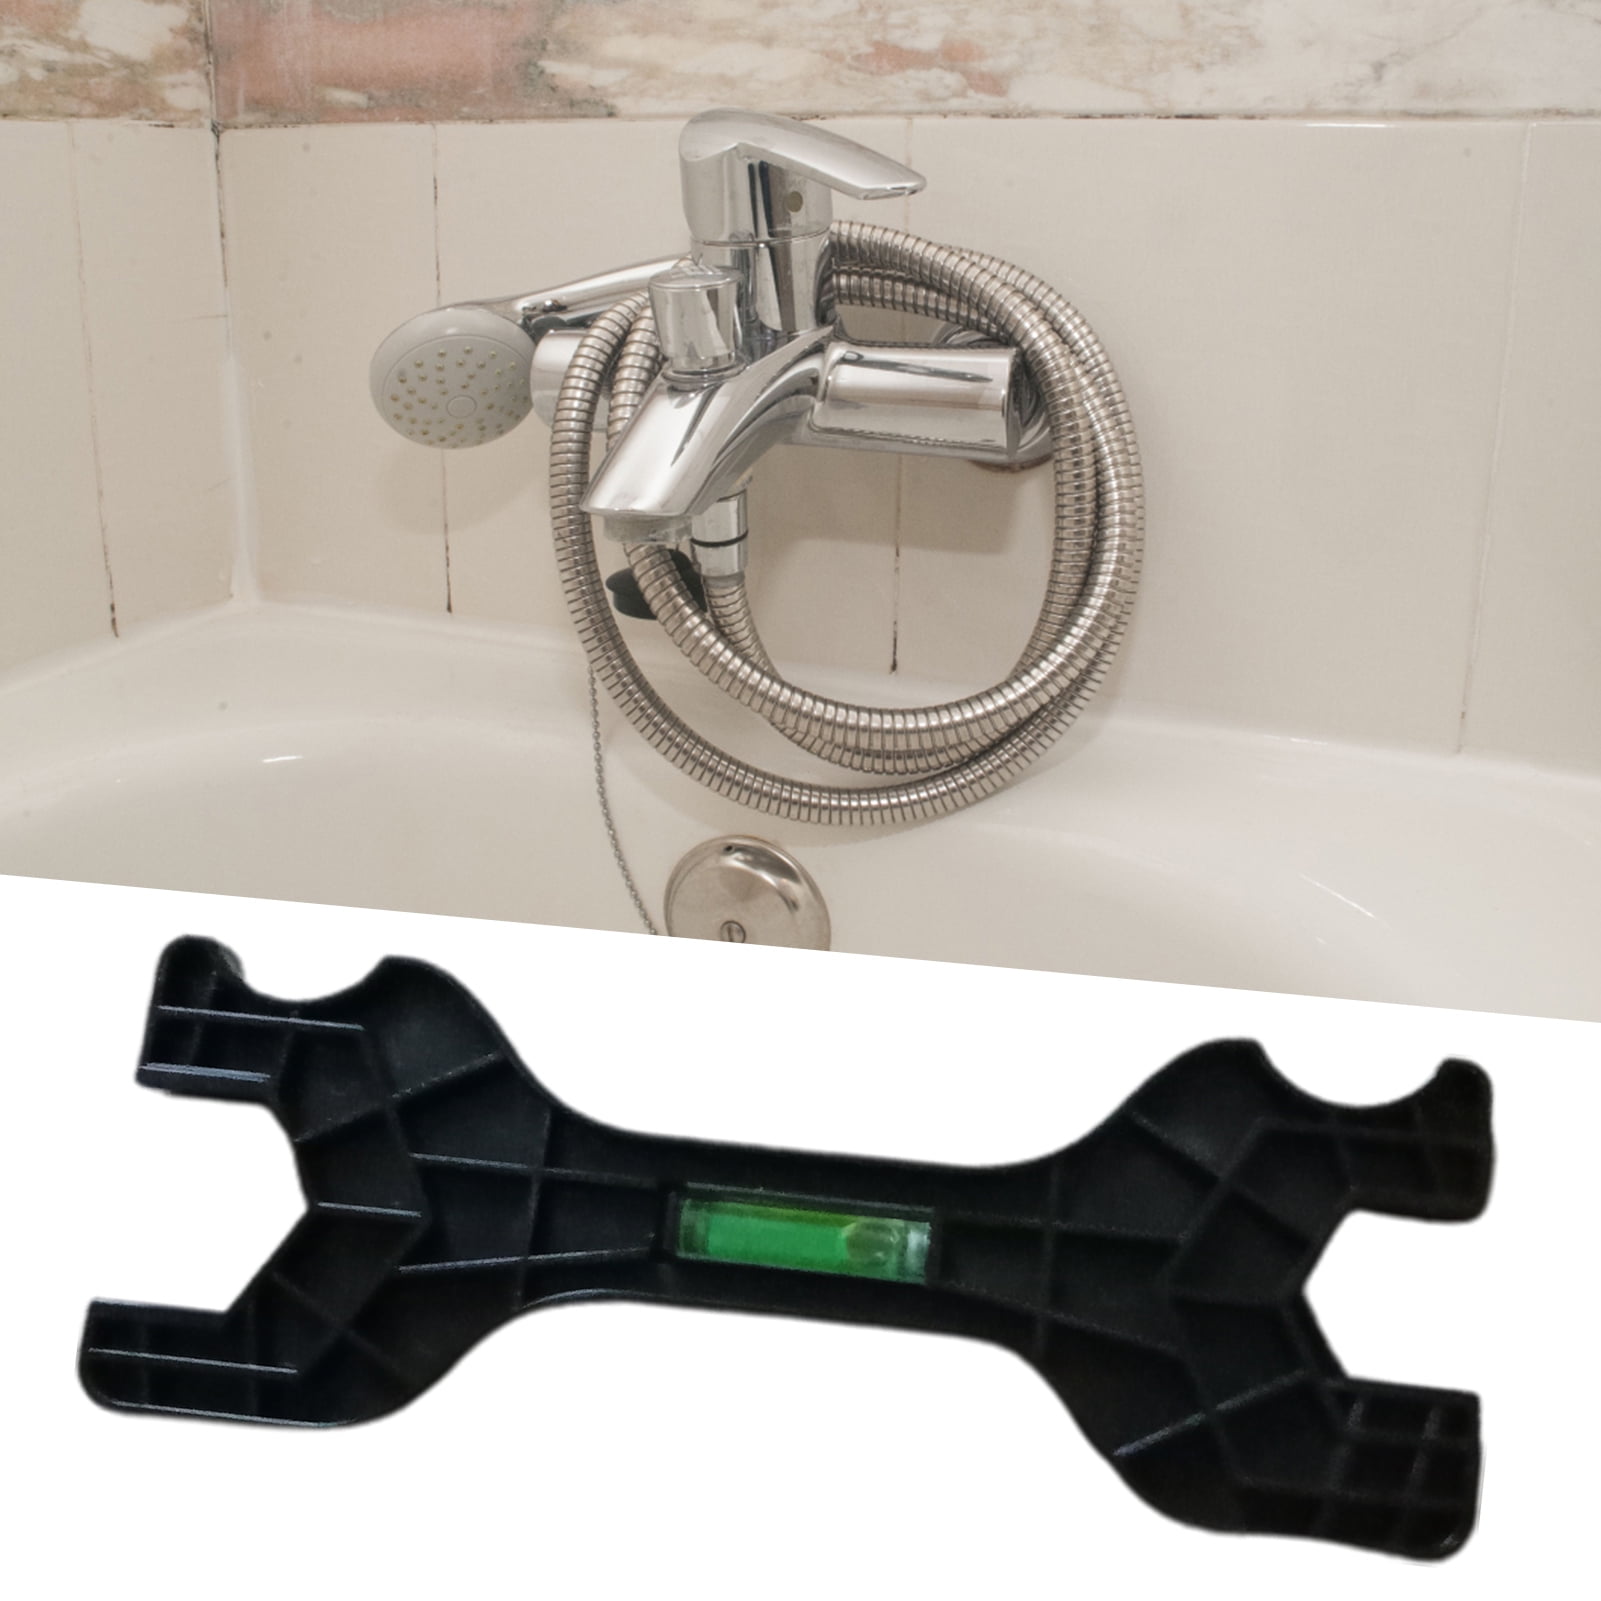 DURATECH Tub Drain Remover Wrench, Tub Dual Ended Drain Wrench, Aluminum  Alloy Wrench for Bath drains, Shower Drains and Closet Spuds